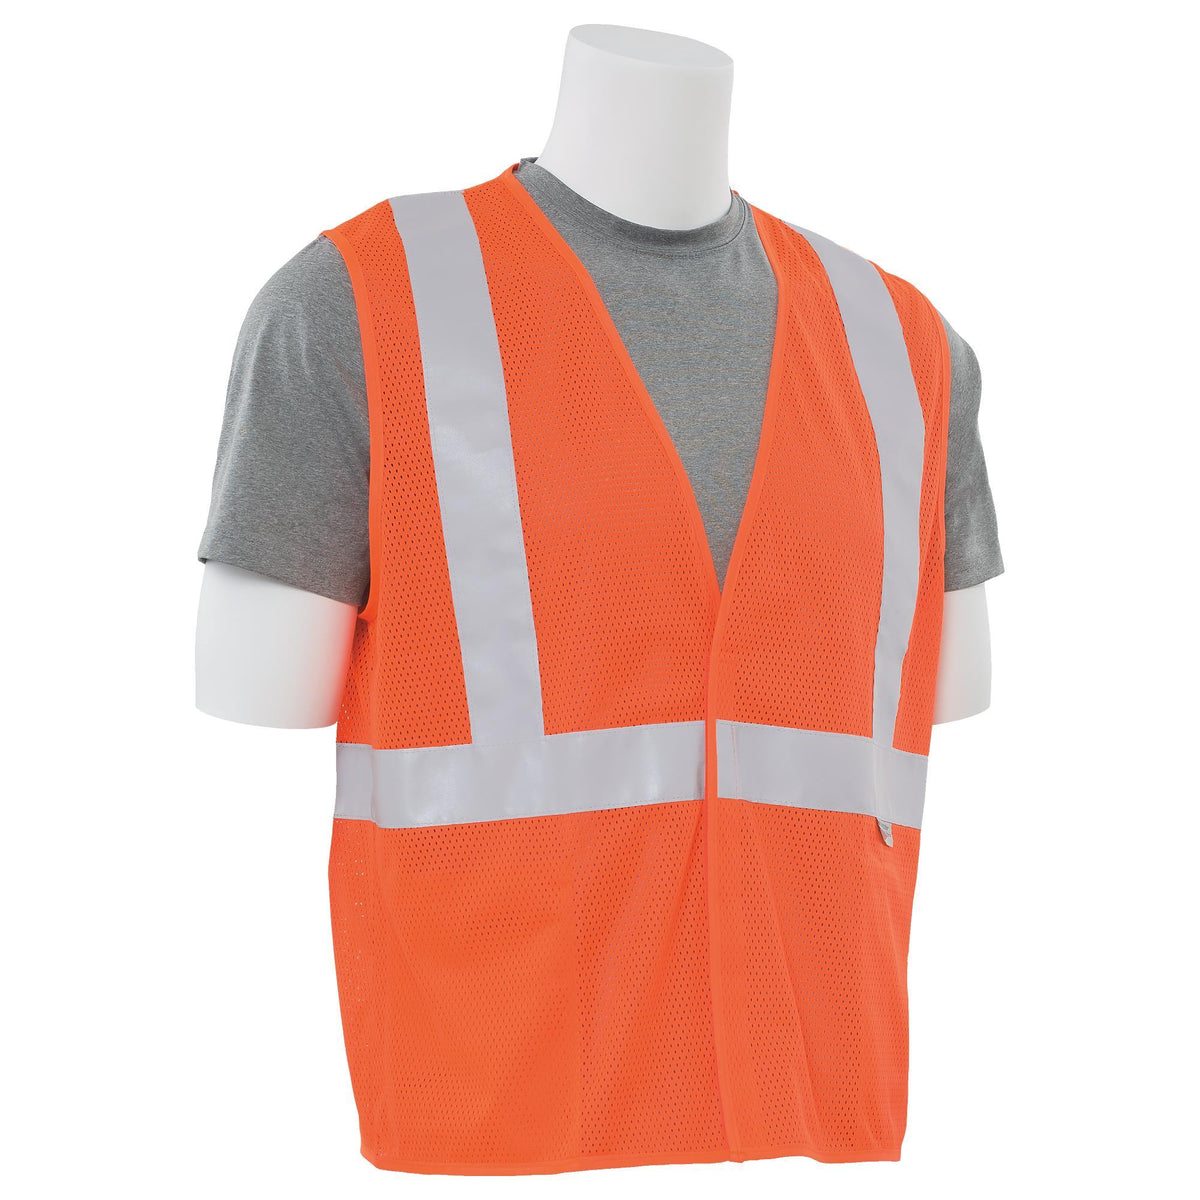 S15 Class 2 Mesh Safety Vest with 3M® Reflective Strips 1PC